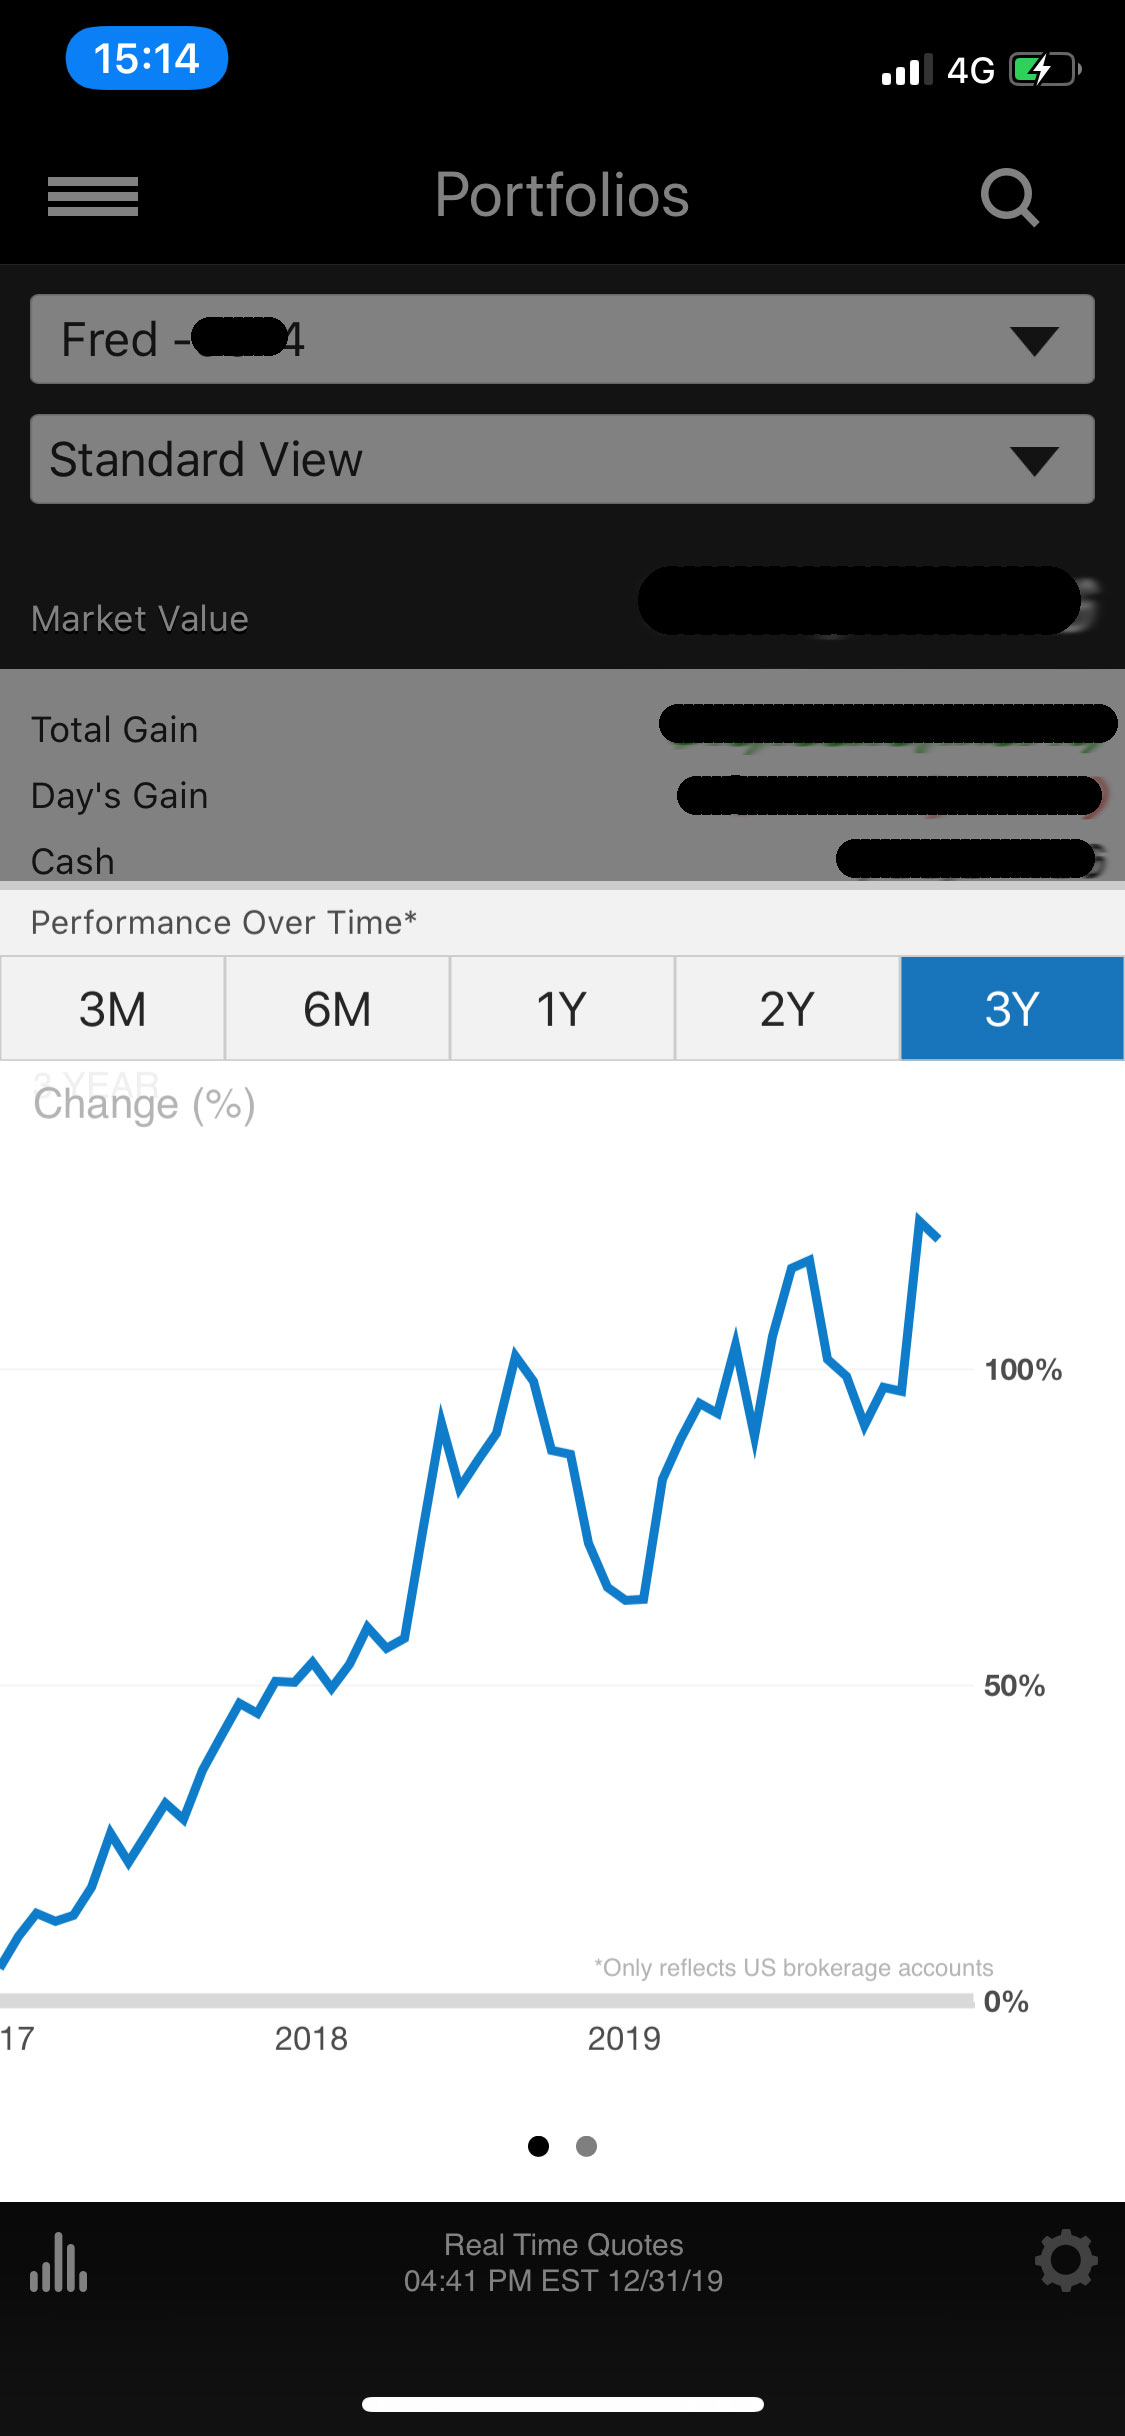  /></p>
<p>As you can see there were a few bumps on the road. Especially in 2018. I even wrote a blog post about my 2018 results here. Yup, this is REAL trading. Not made up results from shrewd marketers who don’t actually trade.</p>
<h3>Should you enroll in that course?</h3>
<p>I’m going to be very straight forward with you. I’m not here to try to get you to buy this course.</p>
<p>This course contains <strong>10 years of work</strong> compiled in more than 50 videos (with subtitles) lessons. I want you, not only to go though this entire course, but also to start using the EGM strategy.</p>
<p>I’ve been trading for more than 10 years and <strong>I’ve been living off my trading using this very strategy</strong>, my bread and butter strategy. I don’t need you to buy my course.</p>
<p>I’ve decided to share it because I’m baffled by the number of traders who simply do NOT have a complete trading strategy and are basically trading randomly in the markets. I want to share what a complete trading strategy actually looks like, so that the people who are serious and motivated enough to want to succeed in this very tough environment trading is, can actually learn the foundations of <strong>a complete trading strategy that works</strong>.</p>
<p>If you’re looking for a Holy Grail strategy that generates money like an ATM machine, I’m afraid you shouldn’t buy this course either. This strategy has made money quite consistently over years, but there will be plenty of unavoidable small losses along the way. If you’re serious about trading, you know that <strong>losses are part of the game of trading</strong> and it is the market that will decide when a strategy will perform well. So <strong>don’t expect a regular monthly income</strong>. This is not a regular job. <strong>This is real trading</strong>.</p>
<p>And neither is it the fake glamorous lifestyle sold by marketers on Instagram and Youtube. Once again, this is REAL trading. And I’ll show you in this course <strong>how money is actually made in trading</strong>, which is COMPLETELY different than what most people think, than what you see on TV or in the news.</p>
<p>So if you’re motivated and want to learn a proven trading strategy for individual U.S. stocks, then you should enroll.</p>
<h3>Course Curriculum</h3>
<p>Introduction</p>
<ul>
<li>Welcome to the EGM Trading Master Class (1:11)</li>
<li>What Will You Learn? (1:29)</li>
<li>Is This Course For You? (3:50)</li>
<li>Why Am I Teaching My Strategy? (2:36)</li>
<li>A Bit About Myself (4:41)</li>
<li>How To Get The Most From This Course (4:33)</li>
</ul>
<p>Thinking in Probabilities</p>
<ul>
<li>Introduction</li>
<li>Accepting The Uncertainty (2:43)</li>
<li>The Casino Paradigm – The Edge (2:20)</li>
<li>Measuring Your Edge: The Expectancy (4:30)</li>
<li>Trading Small (2:21)</li>
<li>Win Rate VS Profit-to-Loss Ratio (4:51)</li>
<li>R and R-Multiples (3:09)</li>
<li>Technicals VS Fundamentals (1:46)</li>
<li>The Law of Large Numbers and its Implications (2:08)</li>
<li>Follow The Strategy (4:14)</li>
</ul>
<p>The Right Mindset</p>
<ul>
<li>The Confirmation Bias (5:57)</li>
<li>Avoid The Recency Bias (1:41)</li>
<li>Focus Is The Key (2:10)</li>
<li>Tune Out The Noise (1:36)</li>
<li>Confidence is Key (4:53)</li>
<li>Your Relationship With Money (3:24)</li>
</ul>
<p>The EGM Strategy</p>
<ul>
<li>It’s Time to Become Independent (1:54)</li>
<li>A Semi-Systematic Approach (3:53)</li>
<li>Making it Difficult Not to Make Money (1:45)</li>
<li>How I Discovered the EGM Strategy (2:33)</li>
<li>My Charts (6:09)</li>
<li>The Technical Structure of an EGM (5:37)</li>
<li>The EGM – Part 1 (12:23)</li>
<li>The EGM – Part 2 (7:54)</li>
<li>The EGM – Part 3 (3:55)</li>
<li>Examples of EGM (32:10)</li>
<li>Entering an EGM (5:45)</li>
<li>Increasing the Odds on a Technical Level (13:36)</li>
<li>Increasing the Odds on a Fundamental Level (16:31)</li>
<li>Increasing the Odds on a Macro Level (4:47)</li>
<li>Increasing the Odds – Misc (4:32)</li>
<li>The Ingredients of a Great Entry (11:18)</li>
<li>Exiting an EGM – Initial Stop (16:45)</li>
<li>Exiting an EGM – Trailing Stops (14:42)</li>
<li>The Ingredients of a Great Exit (3:32)</li>
<li>Position Sizing (7:29)</li>
<li>How to Find EGM Setups (8:36)</li>
<li>A Robust Strategy (5:37)</li>
</ul>
<p>What’s Next?</p>
<ul>
<li>Expectations (4:33)</li>
<li>Trading With a Small Account (1:48)</li>
<li>Tips to Follow the Strategy (5:03)</li>
<li>Record Review & Monitor (2:30)</li>
<li>Good Luck (1:30)</li>
</ul>
<hr />
<p> </p>
<!-- wp:separator -->
<hr class=